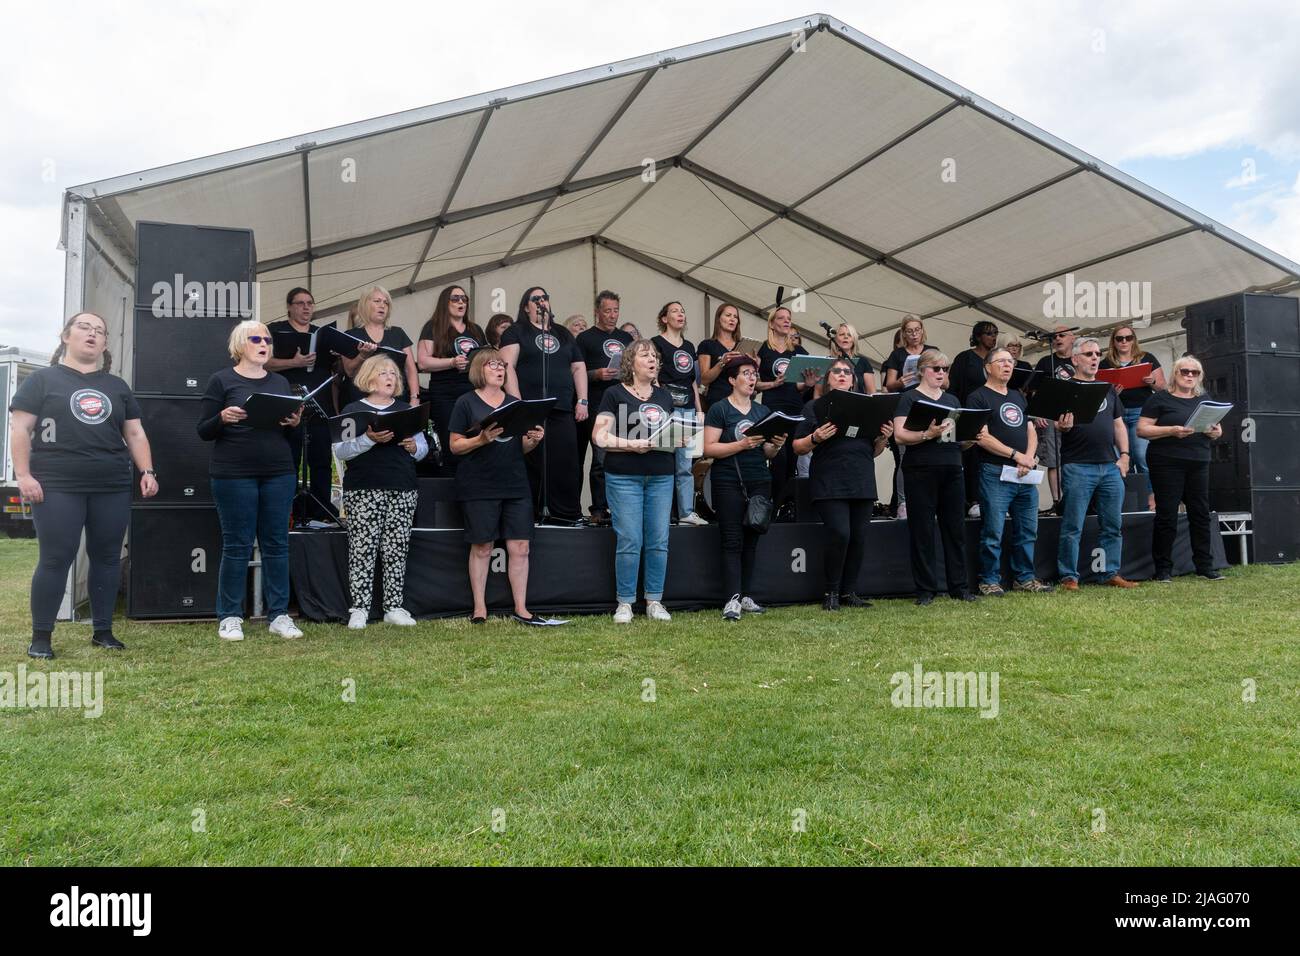 VoxChoir, a social singing group, performing on stage at an outdoor event in Farnborough, Hampshire, England, UK Stock Photo